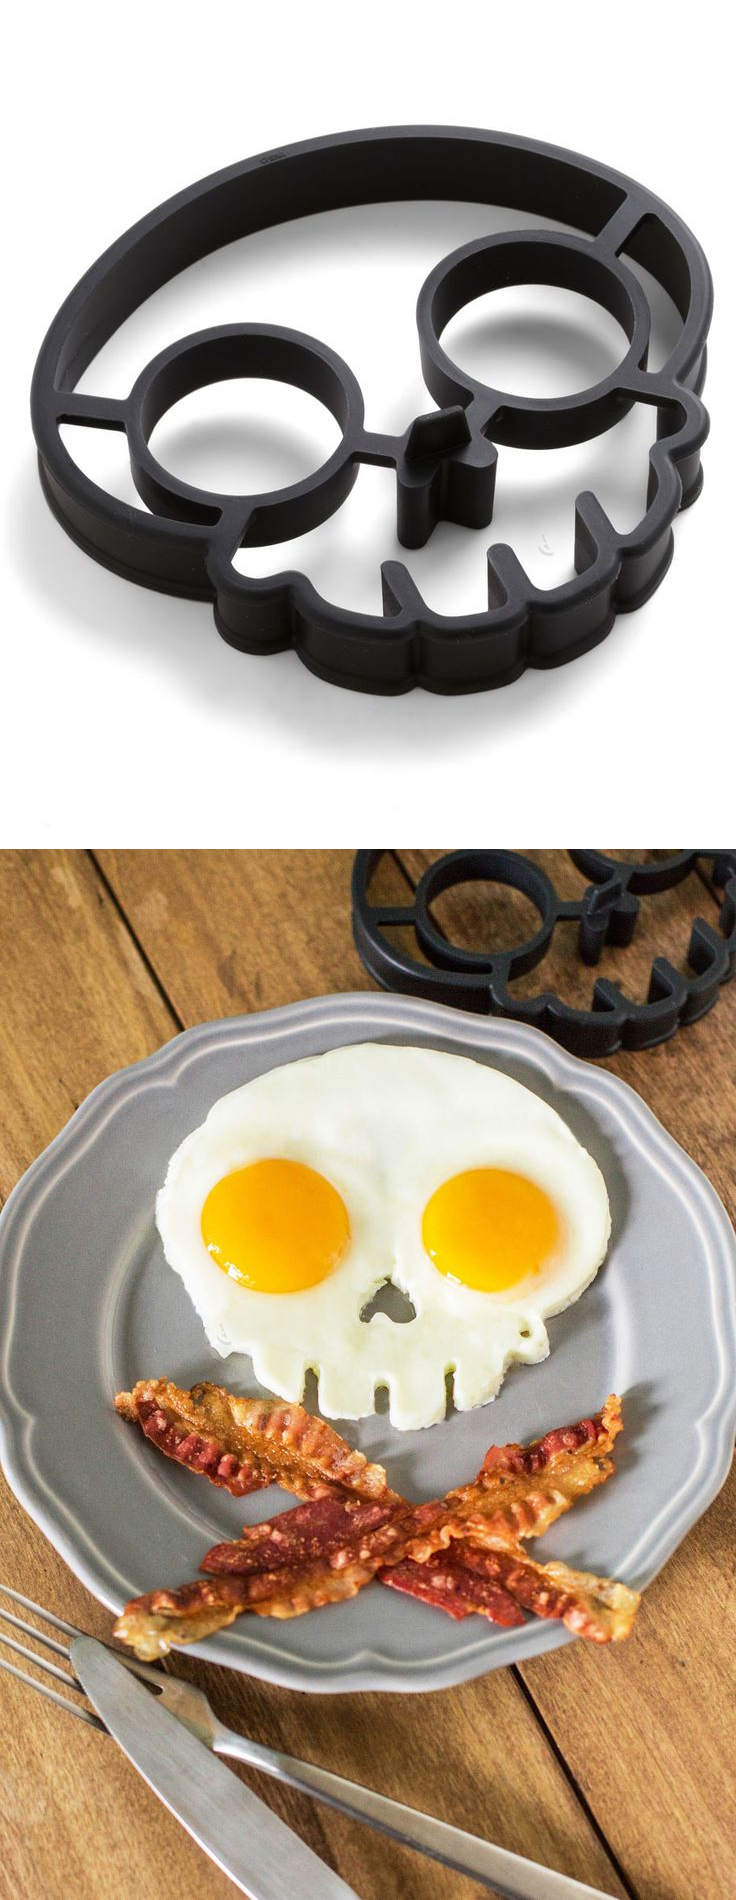 Skull egg mold - AWESOME! #product_design